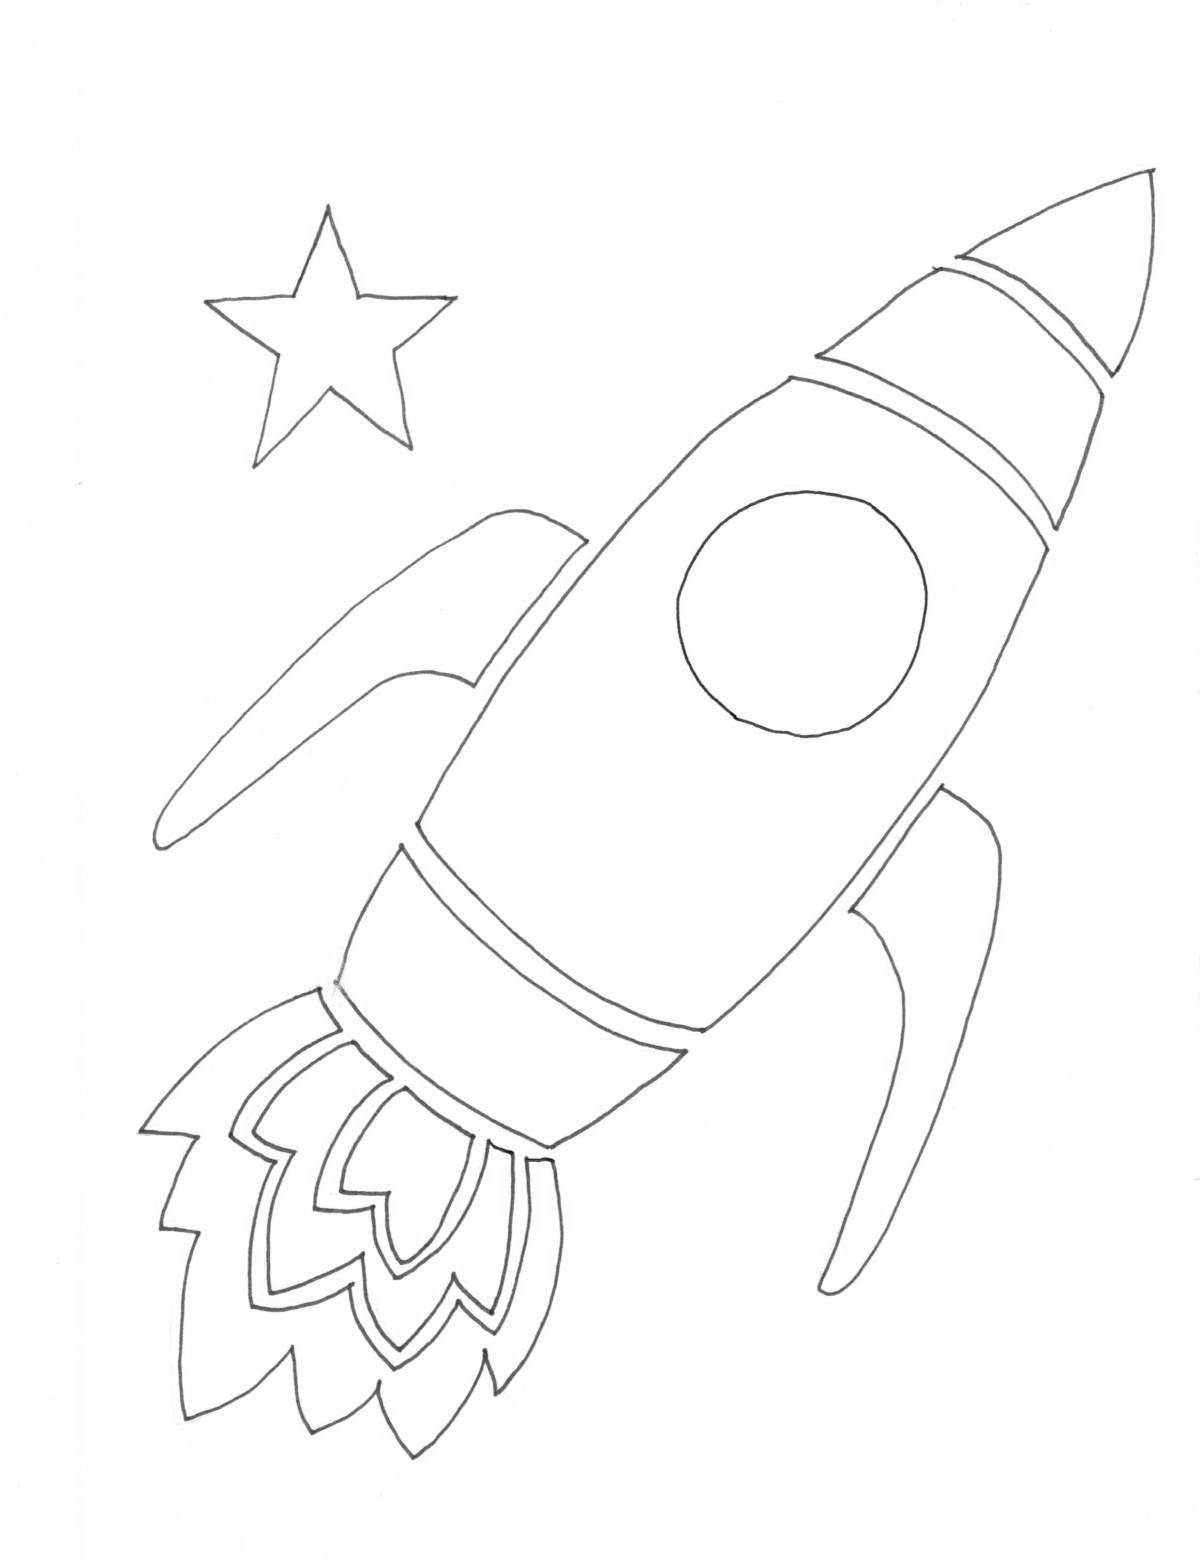 Amazing rocket coloring book for 4-5 year olds